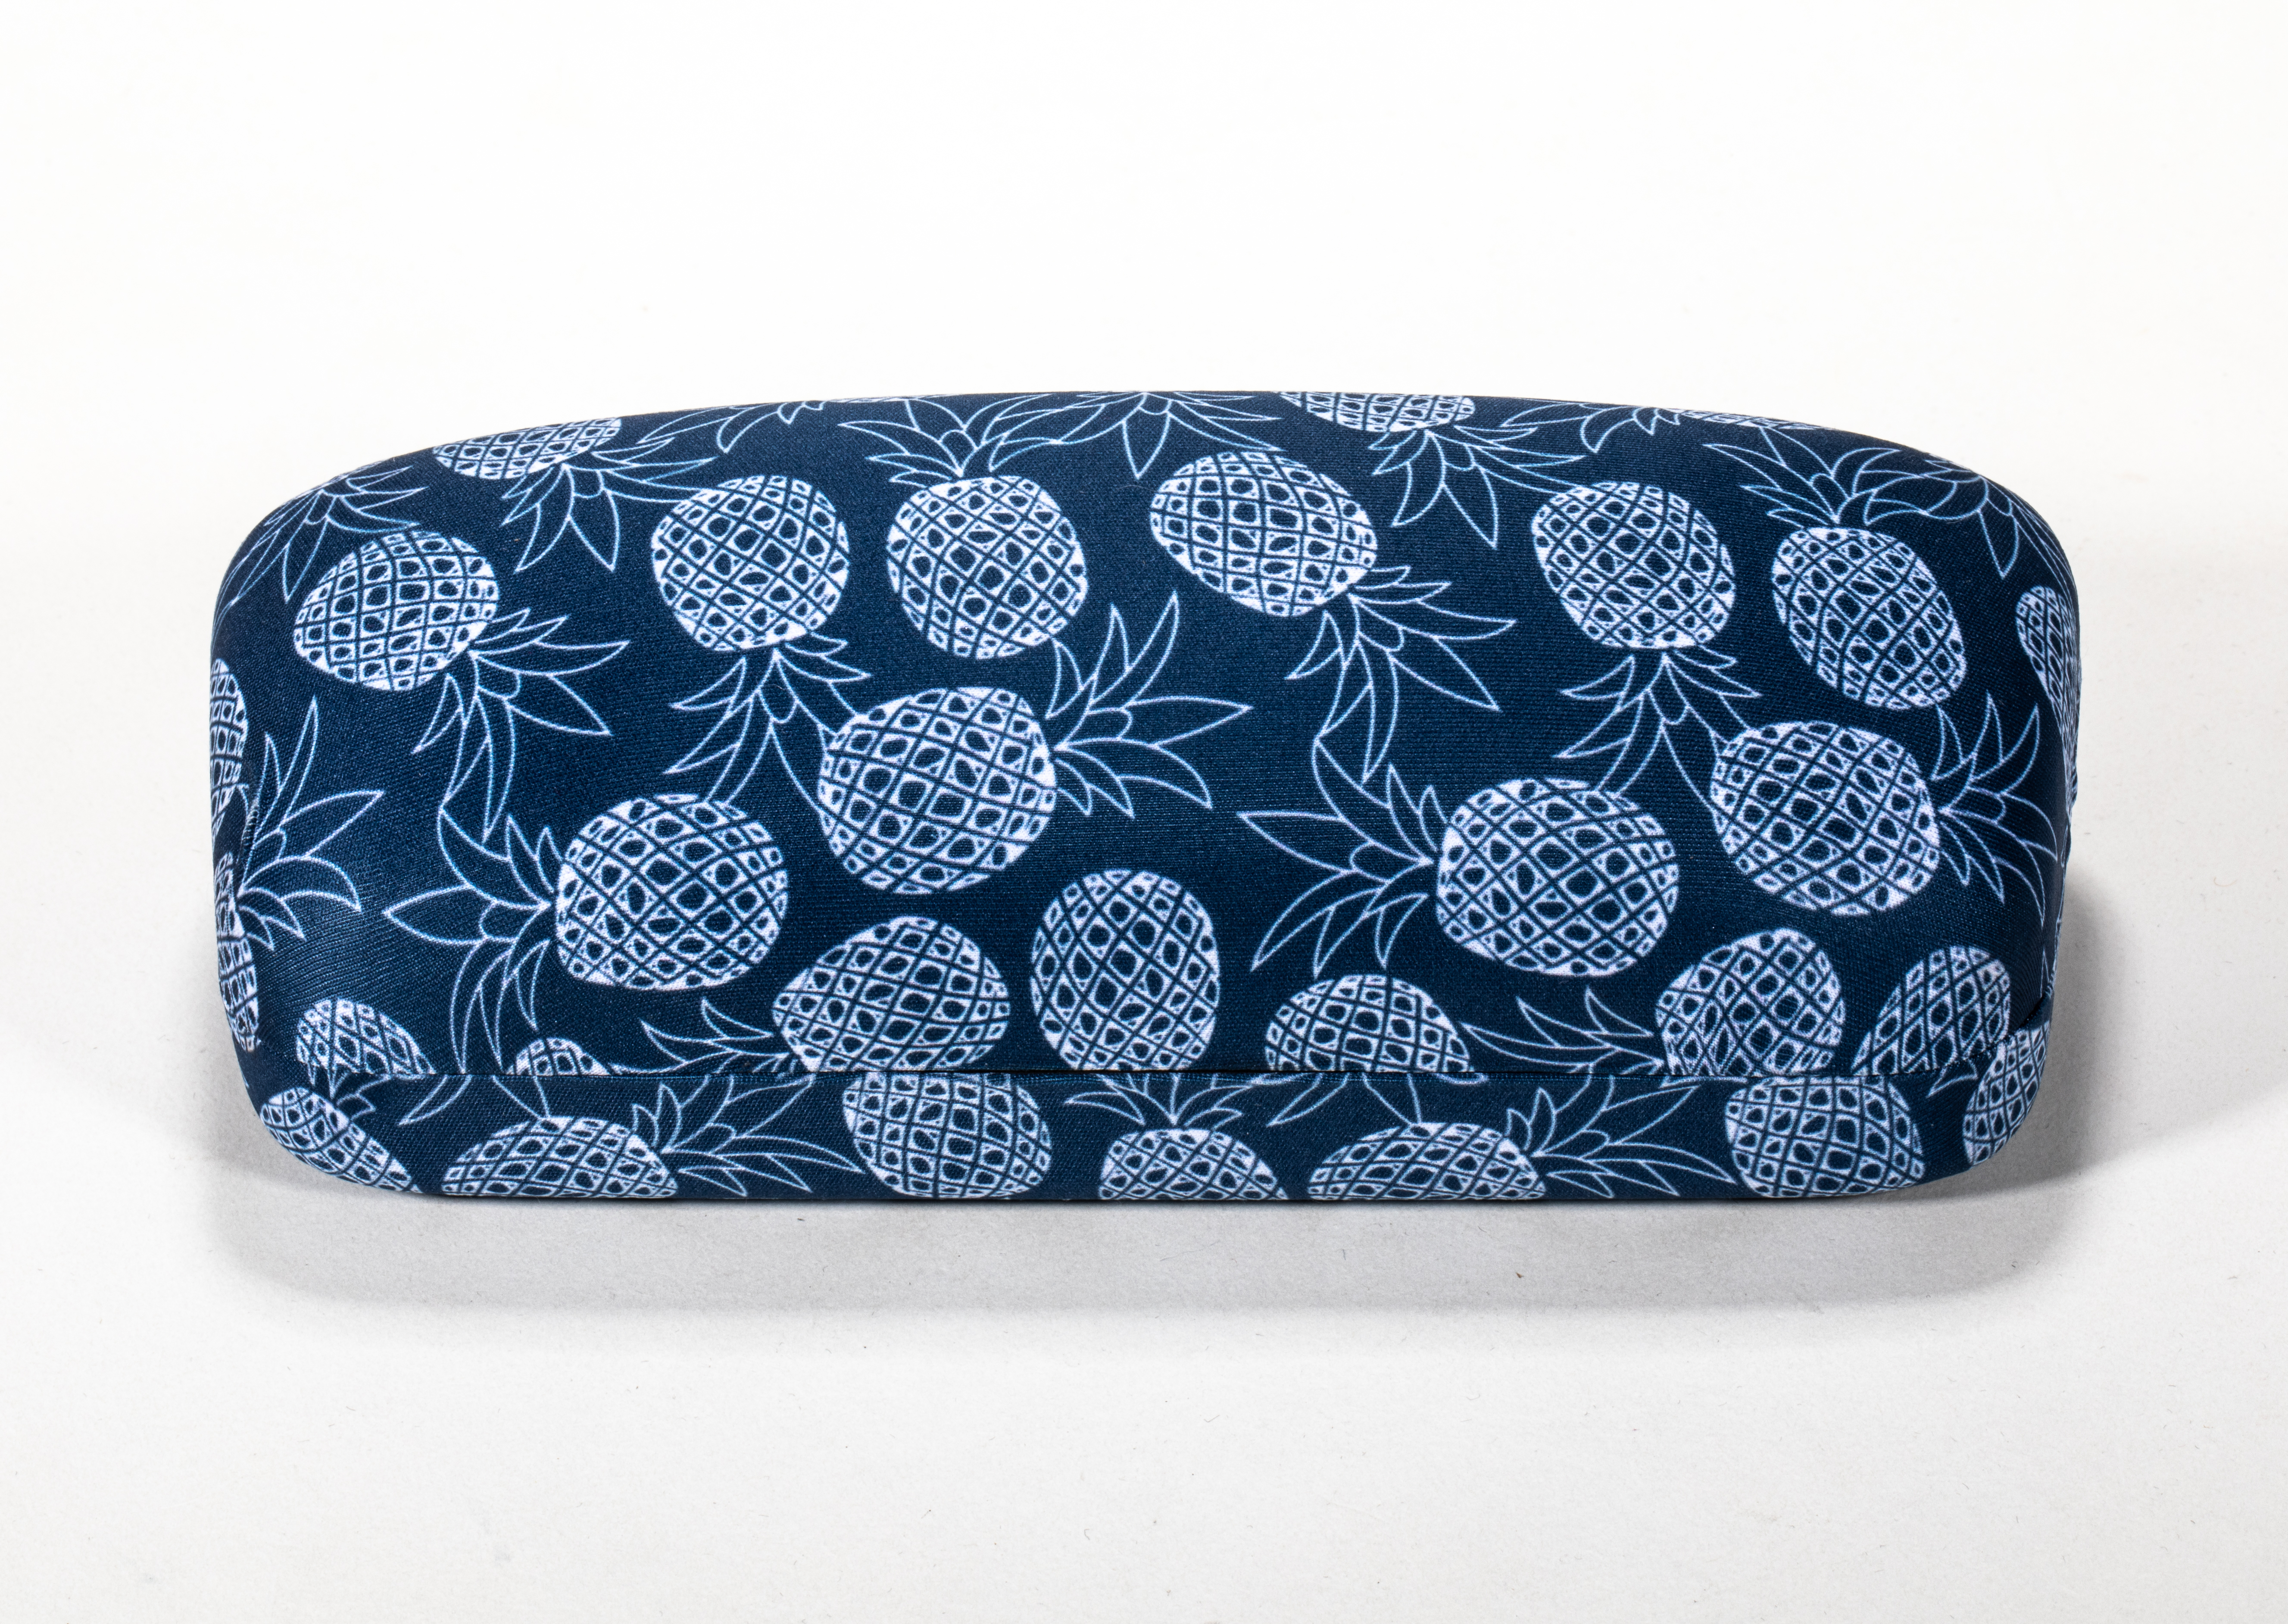 2021 Glasses Case Sunglasses Dark Blue Glasses Case Printed with A Pineapple Pattern